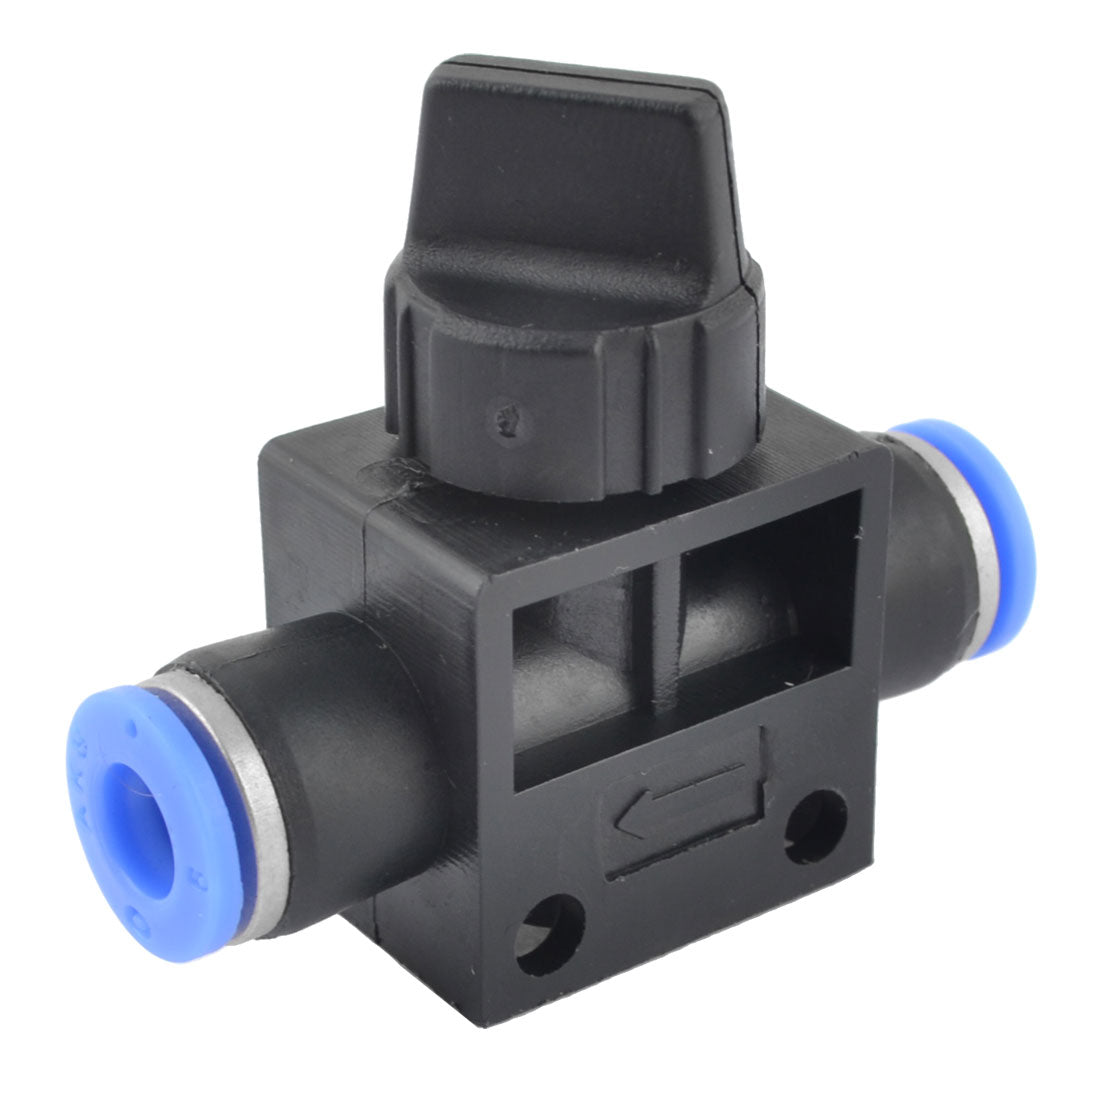 uxcell Uxcell Quarter Turn Switch Blue Black Plastic 6mm Hose Pipe Fitting Coupler Ball Valve